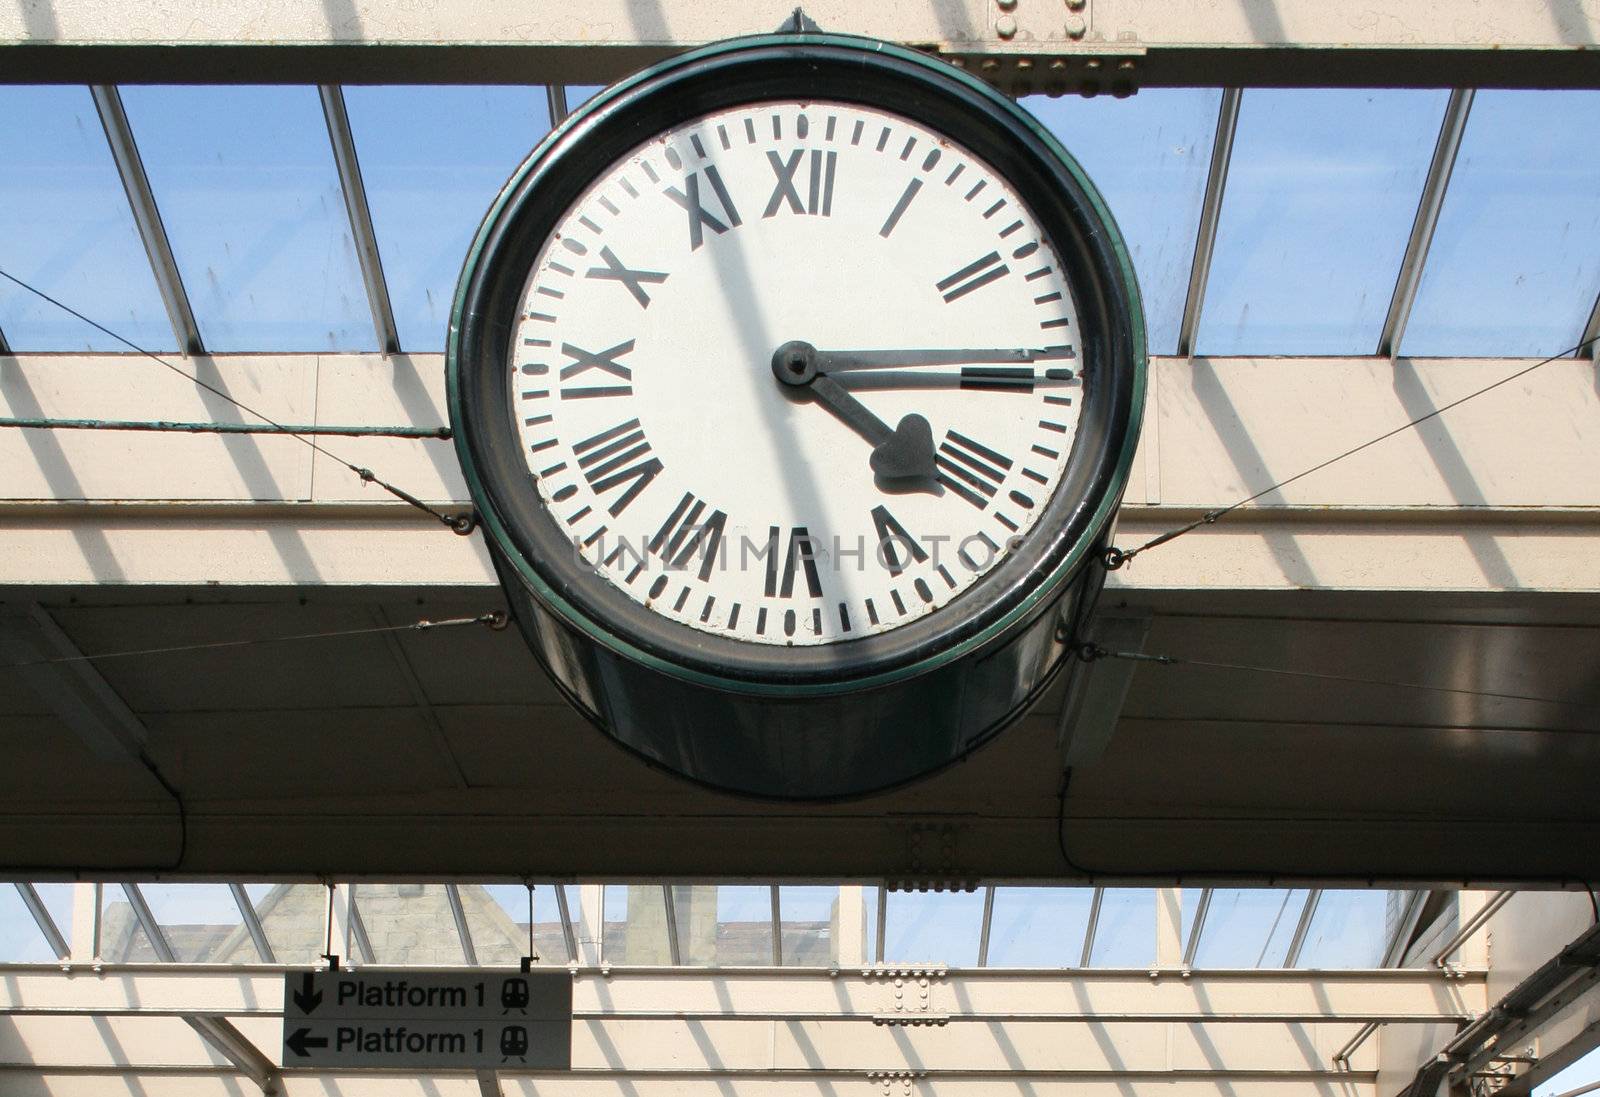 large station clock suspended above the platform of a railway station